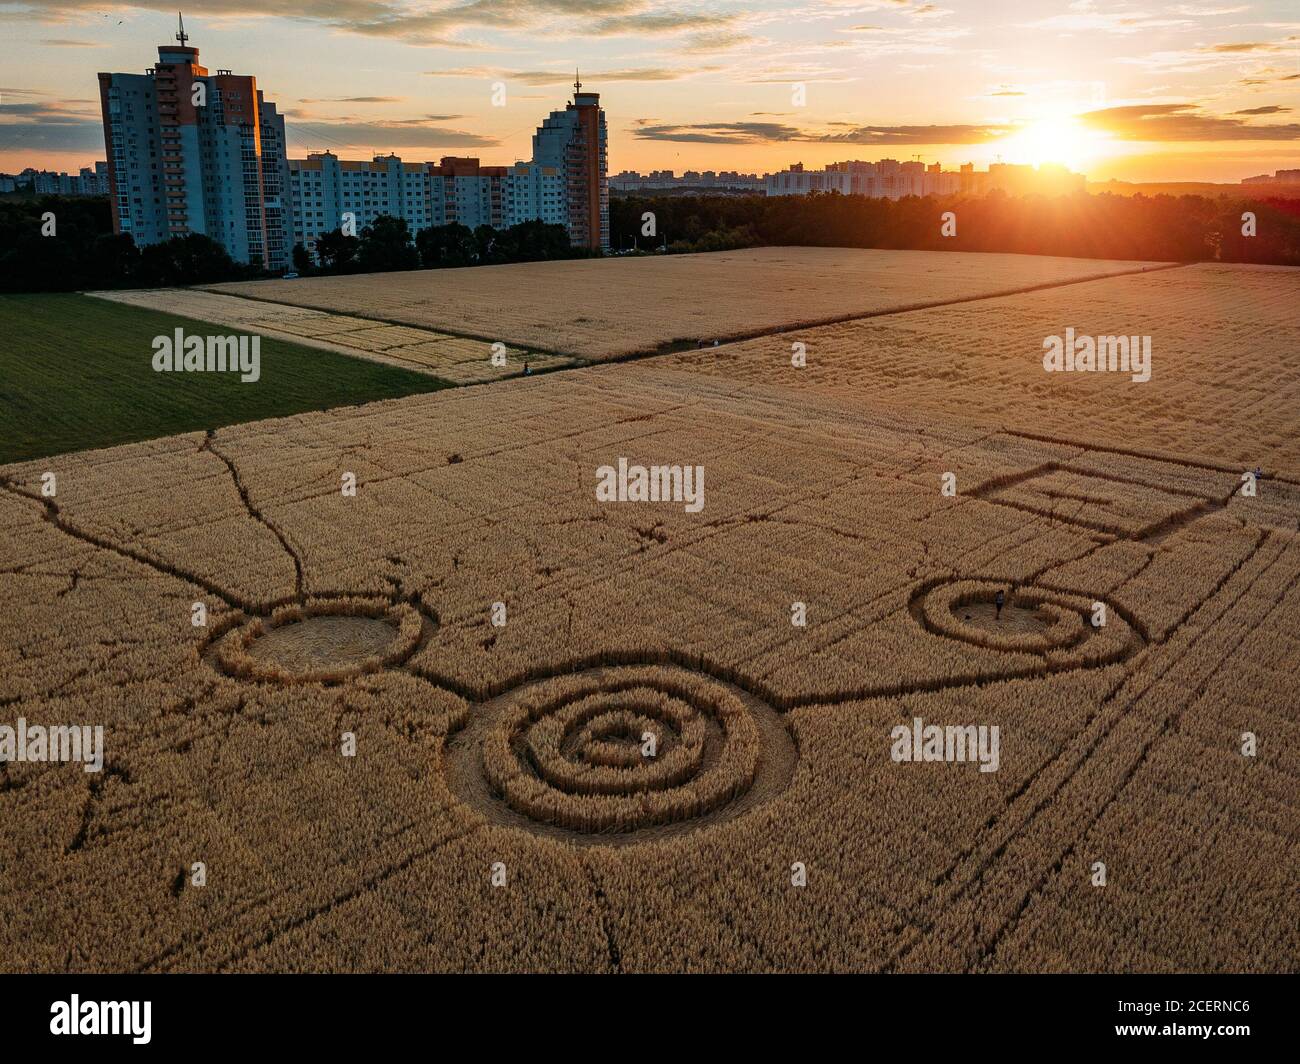 Mysterious crop circle in oat field near the city at the evening Stock Photo